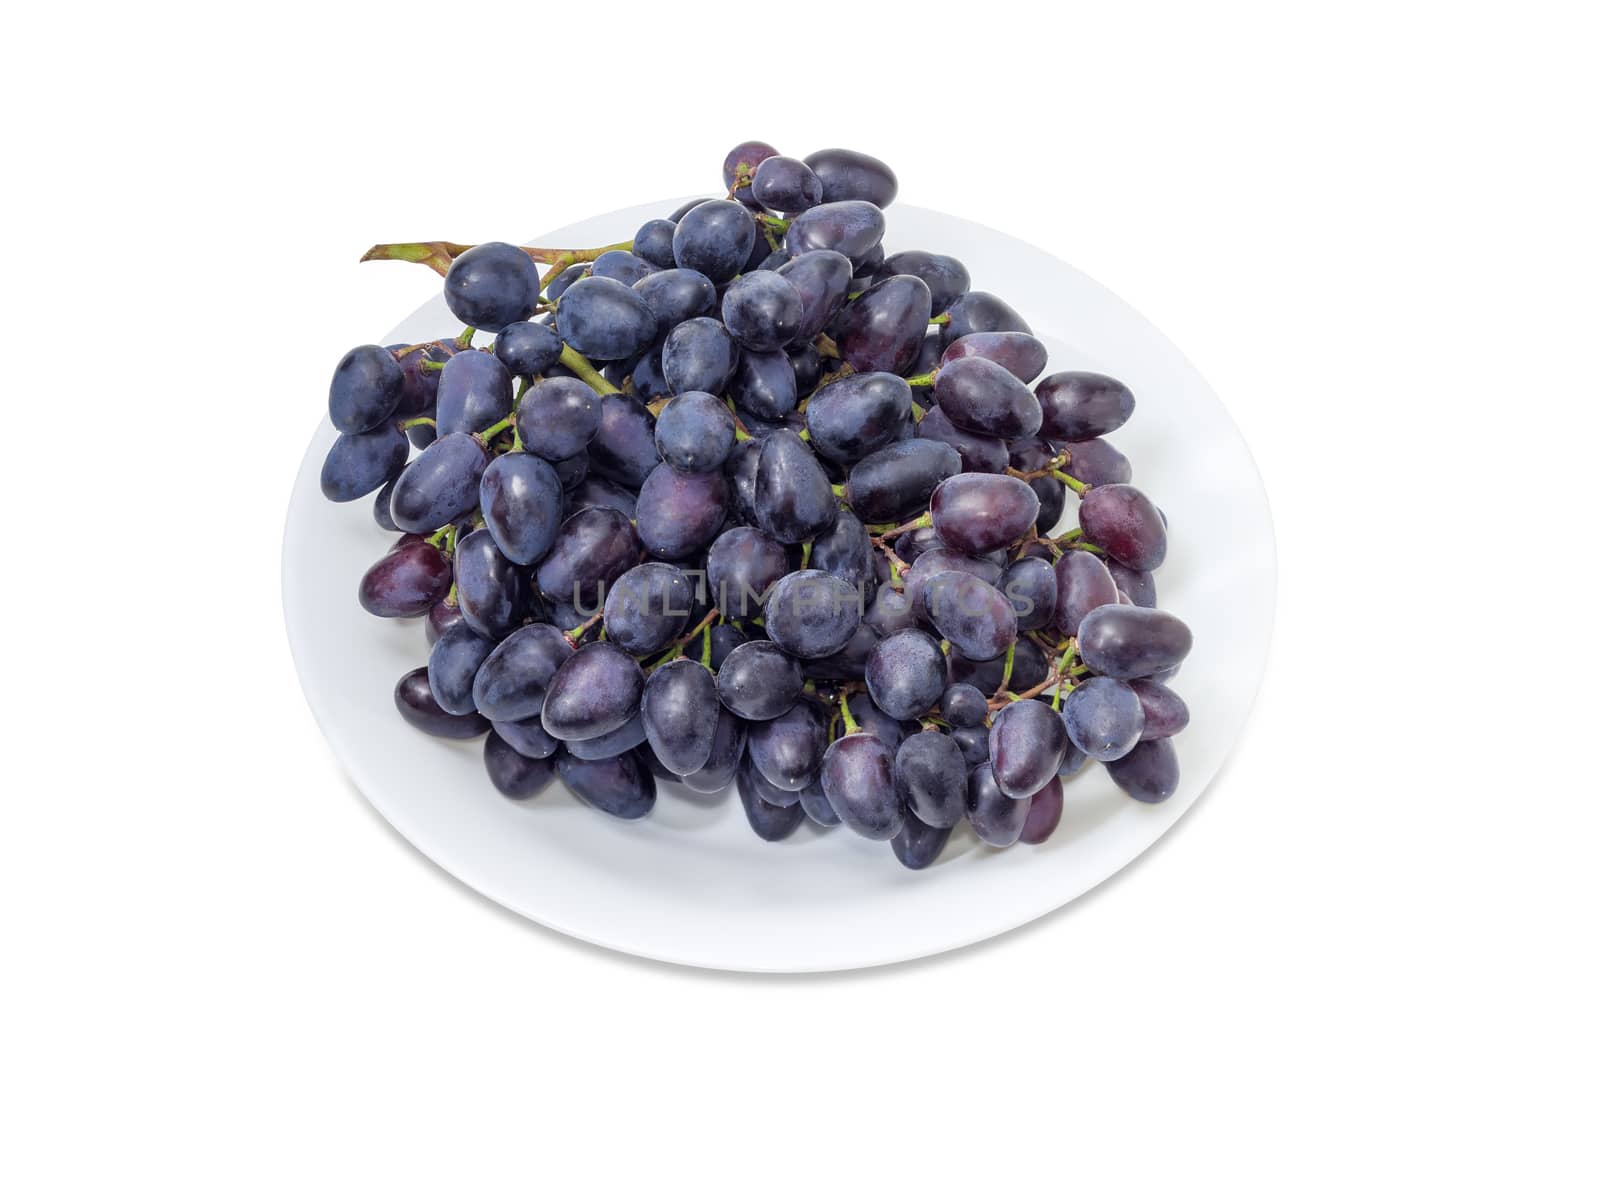 Cluster of the blue grapes on a white dish by anmbph